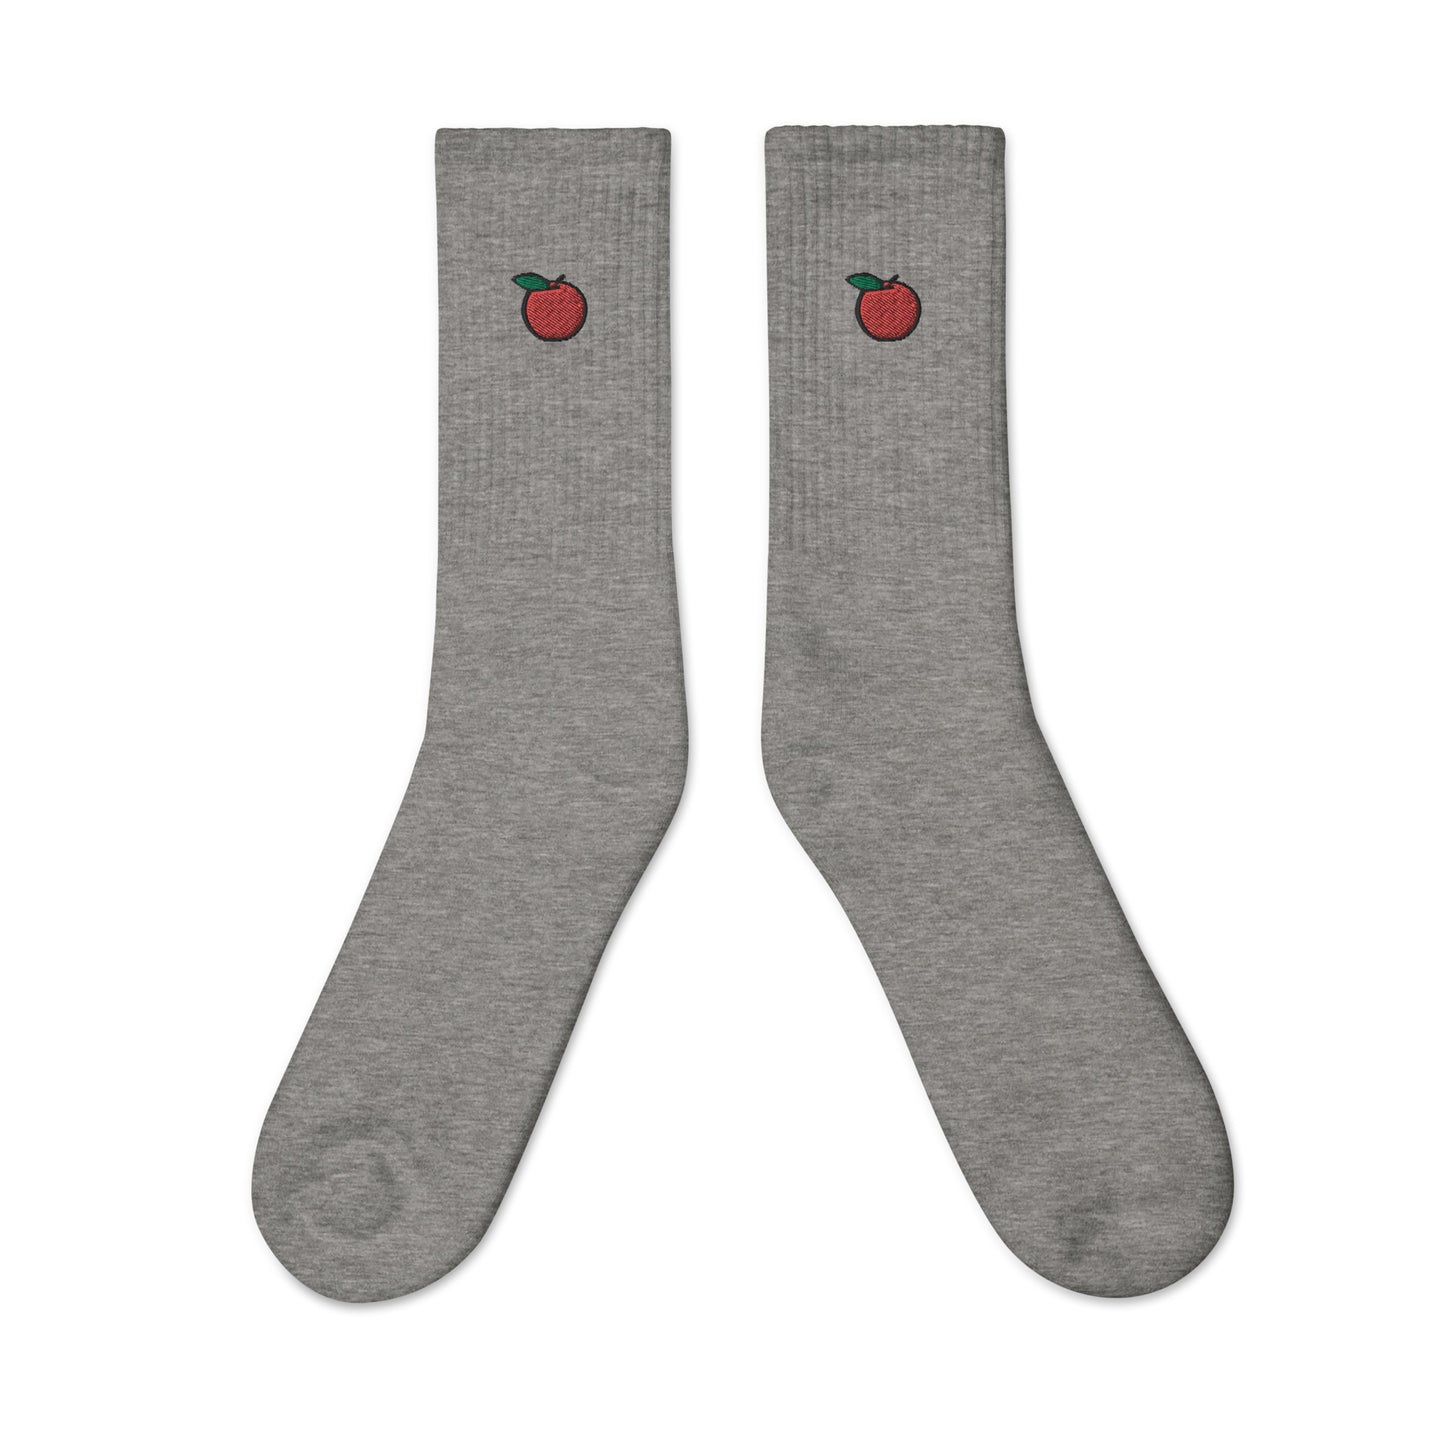 socks-from-the-front-with-apple-fruit-symbol